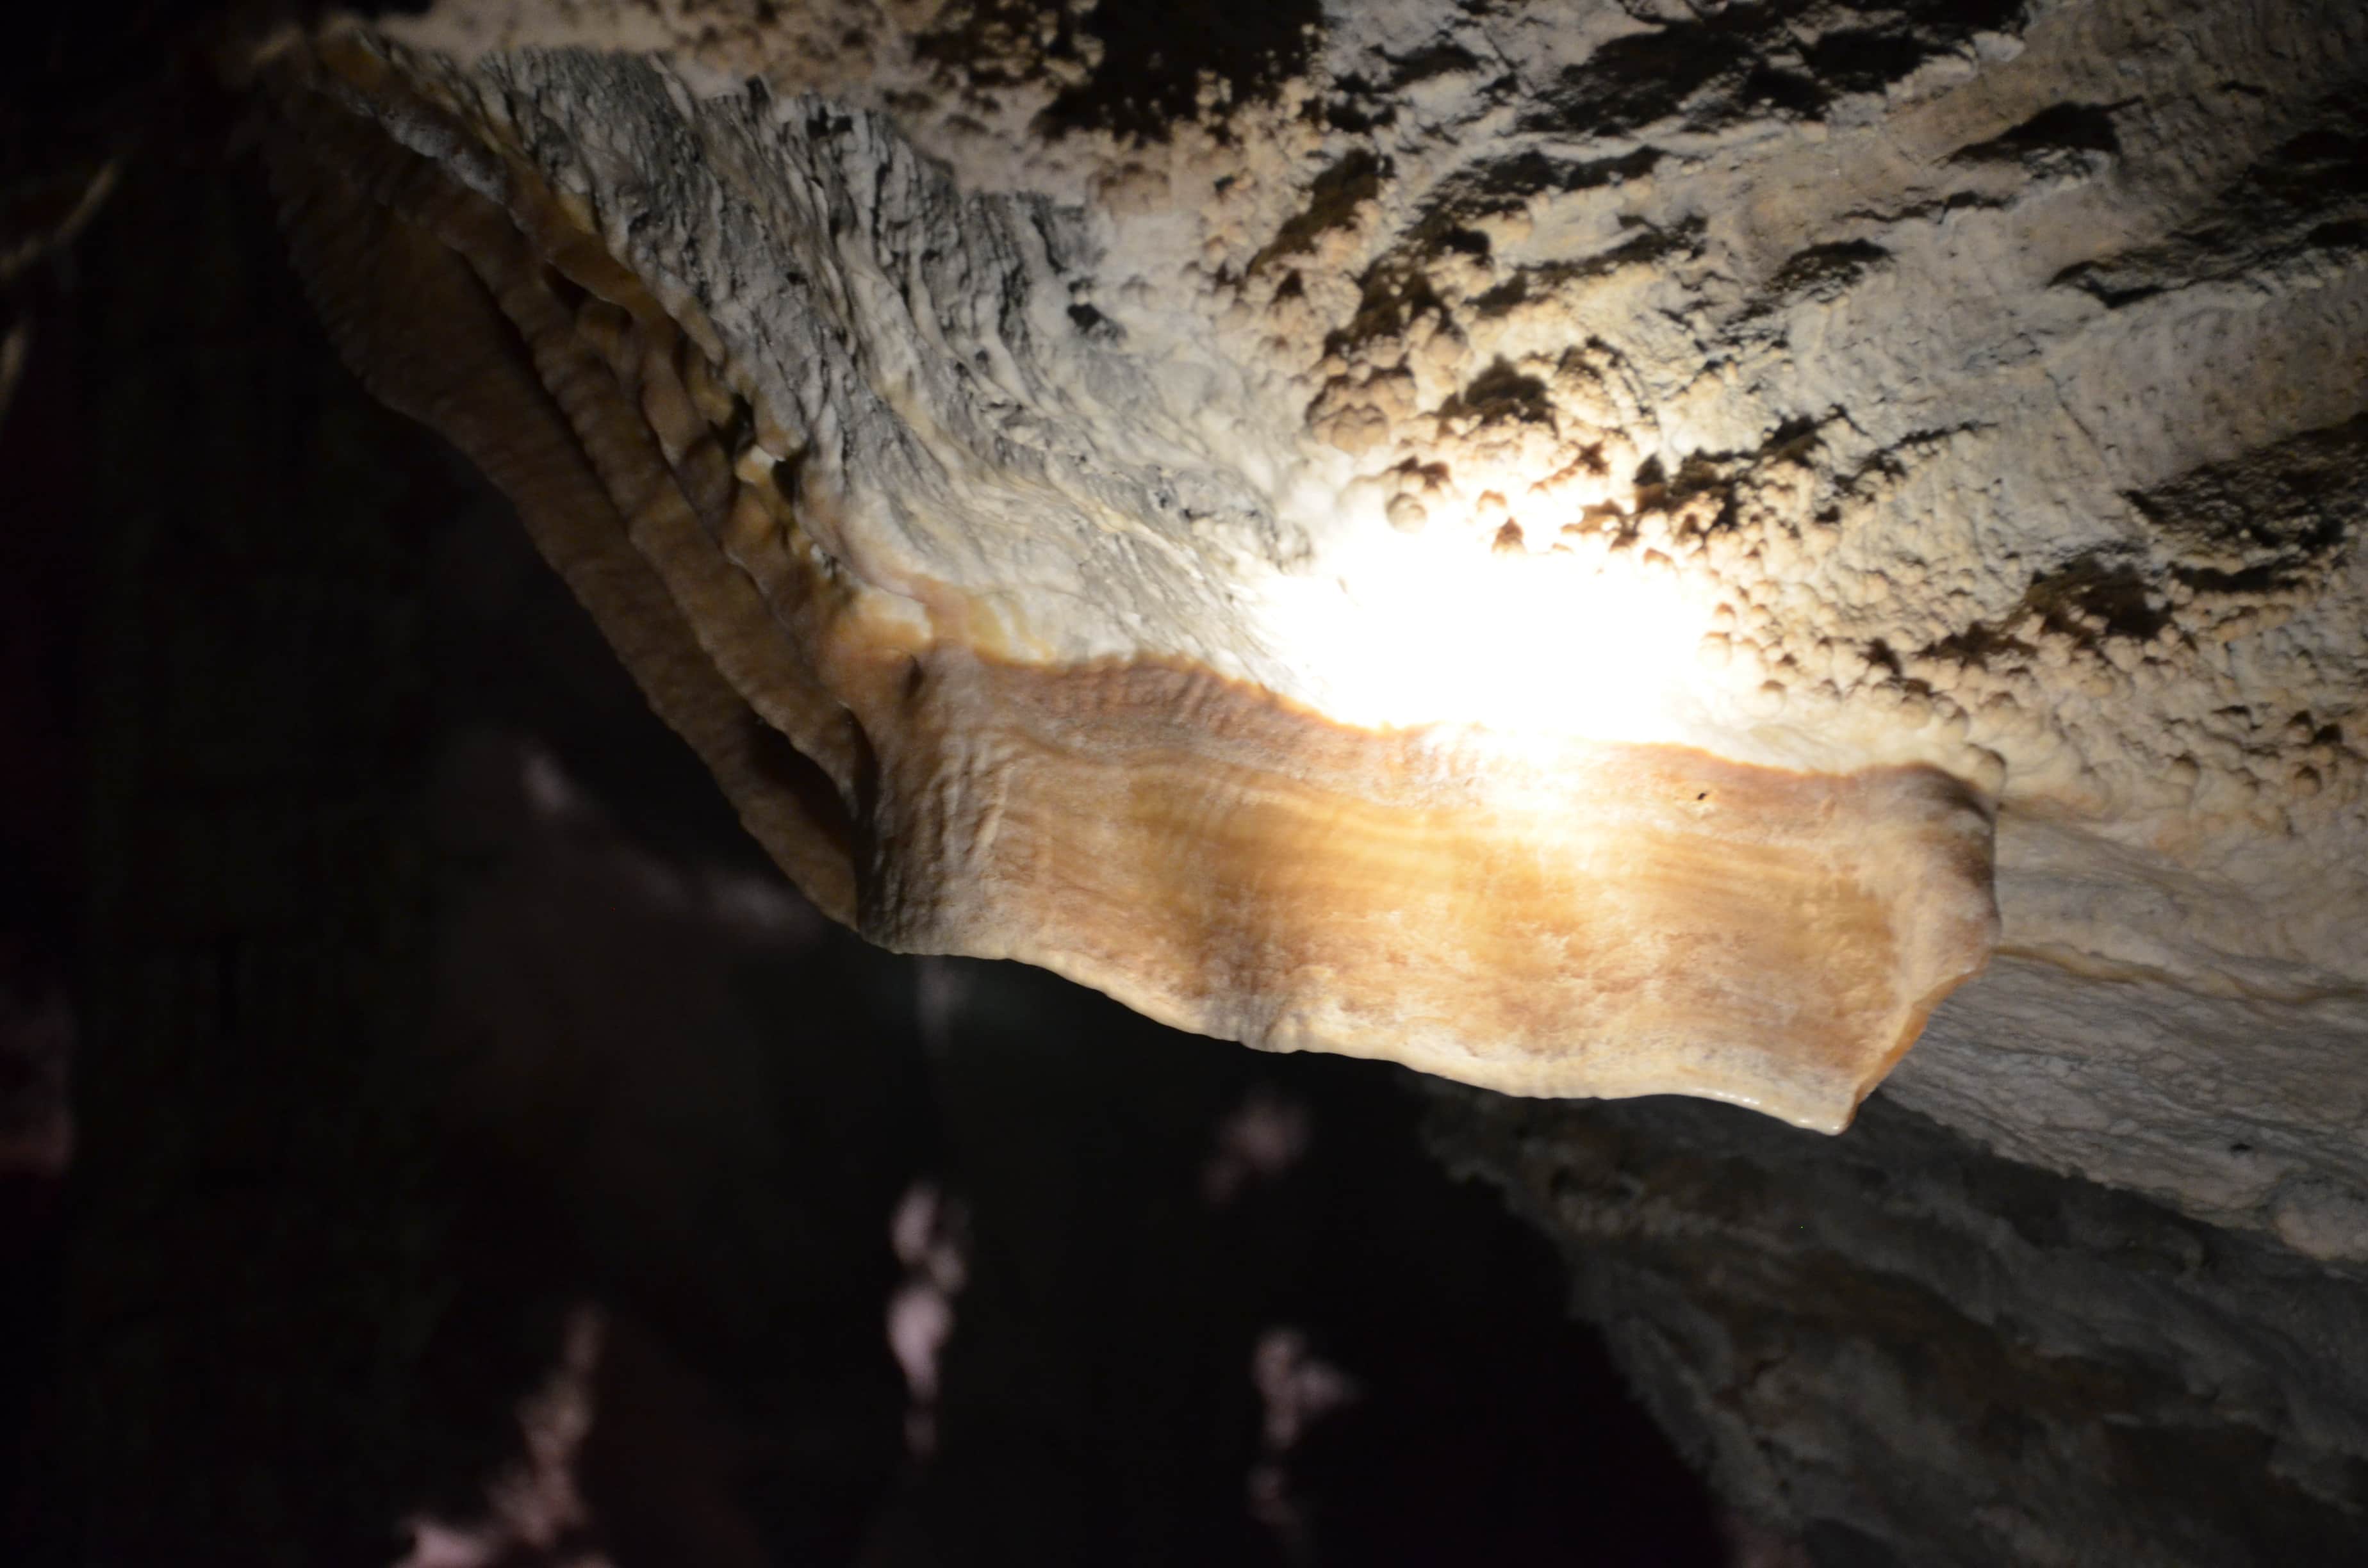 Cave bacon